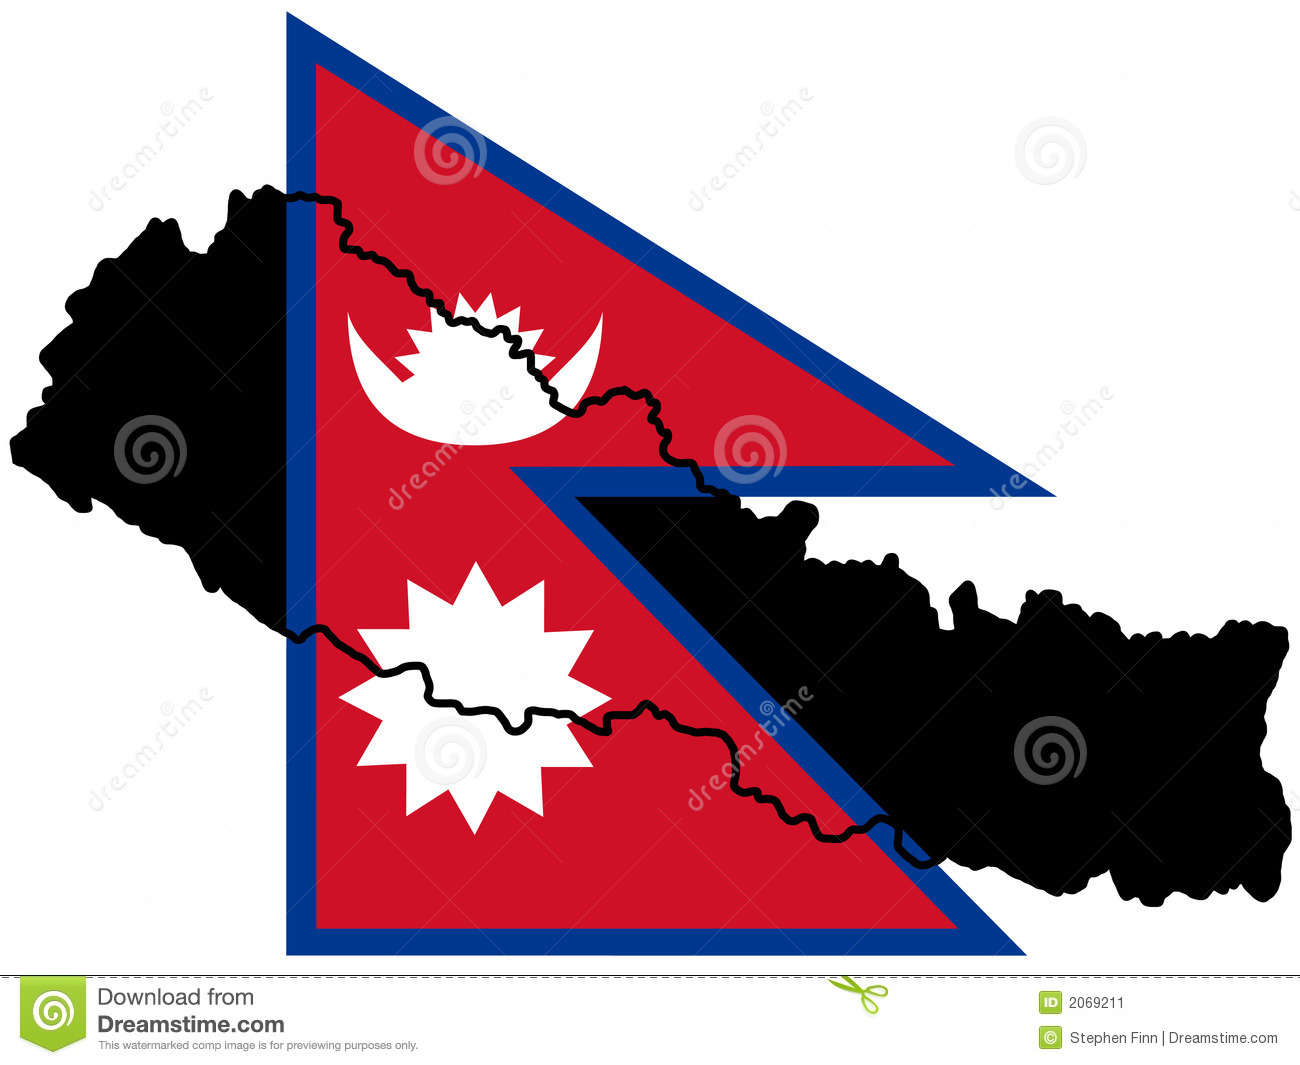 Map Of Nepal And Nepalese Flag Illustration